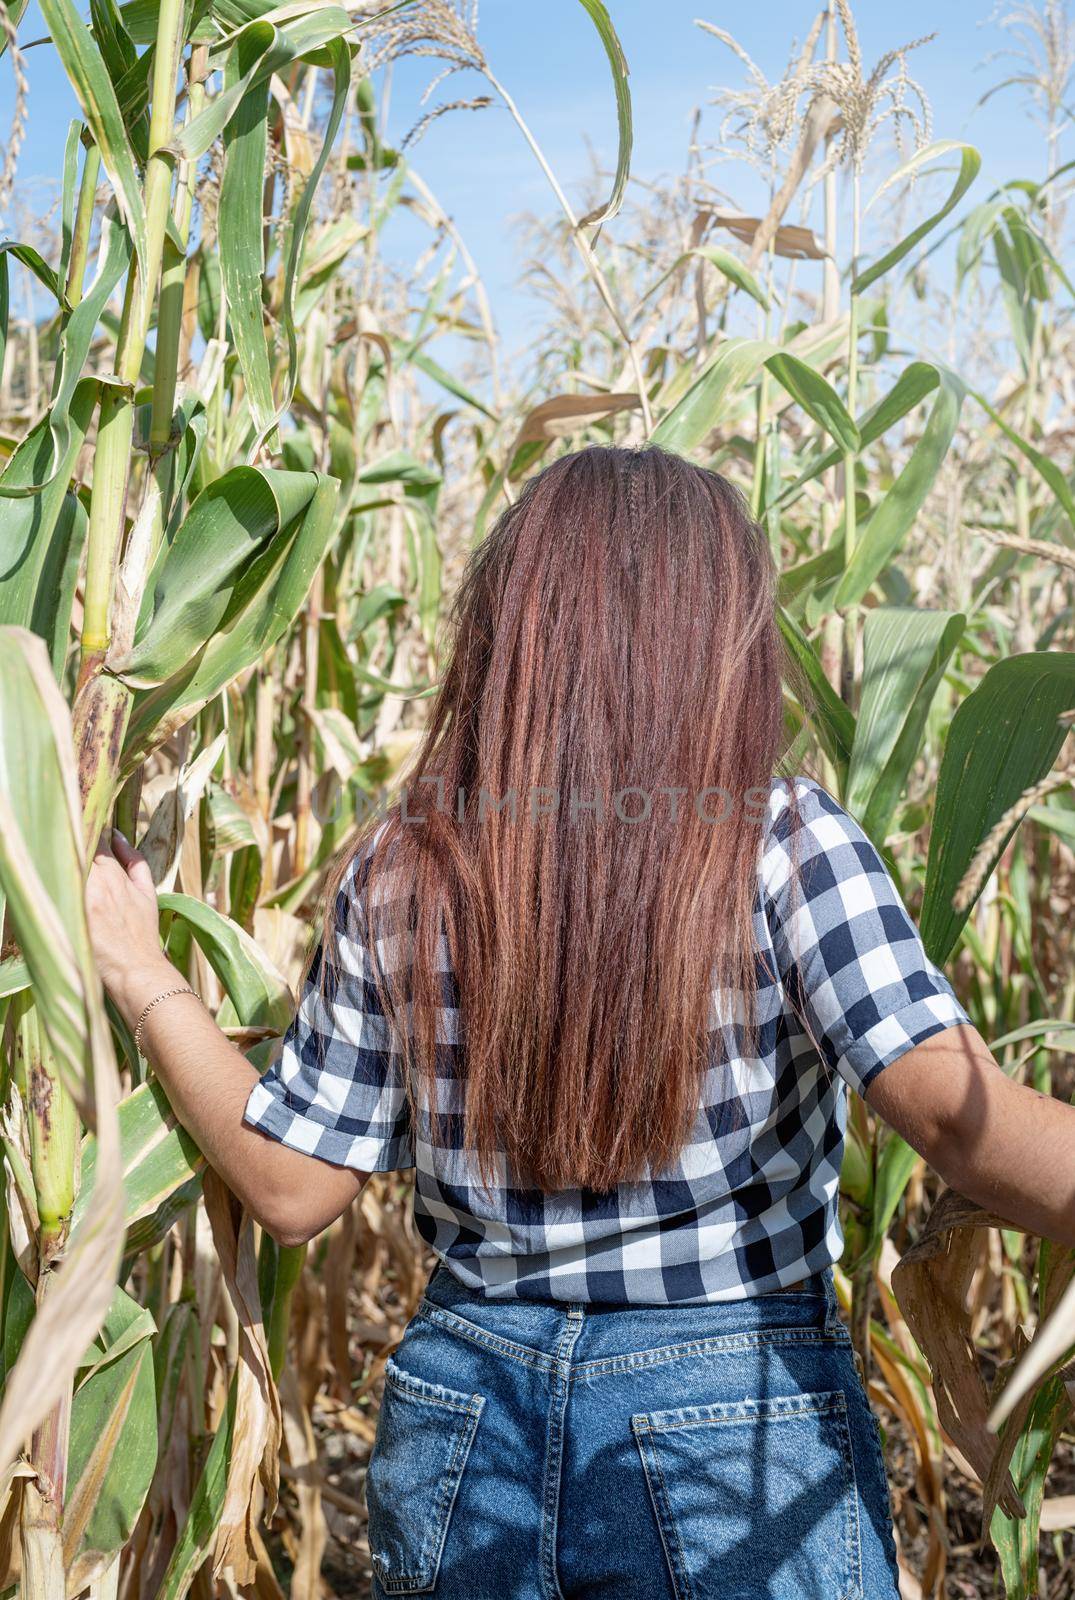 Cheerful female caucasian woman in the corn crop, view from behind by Desperada